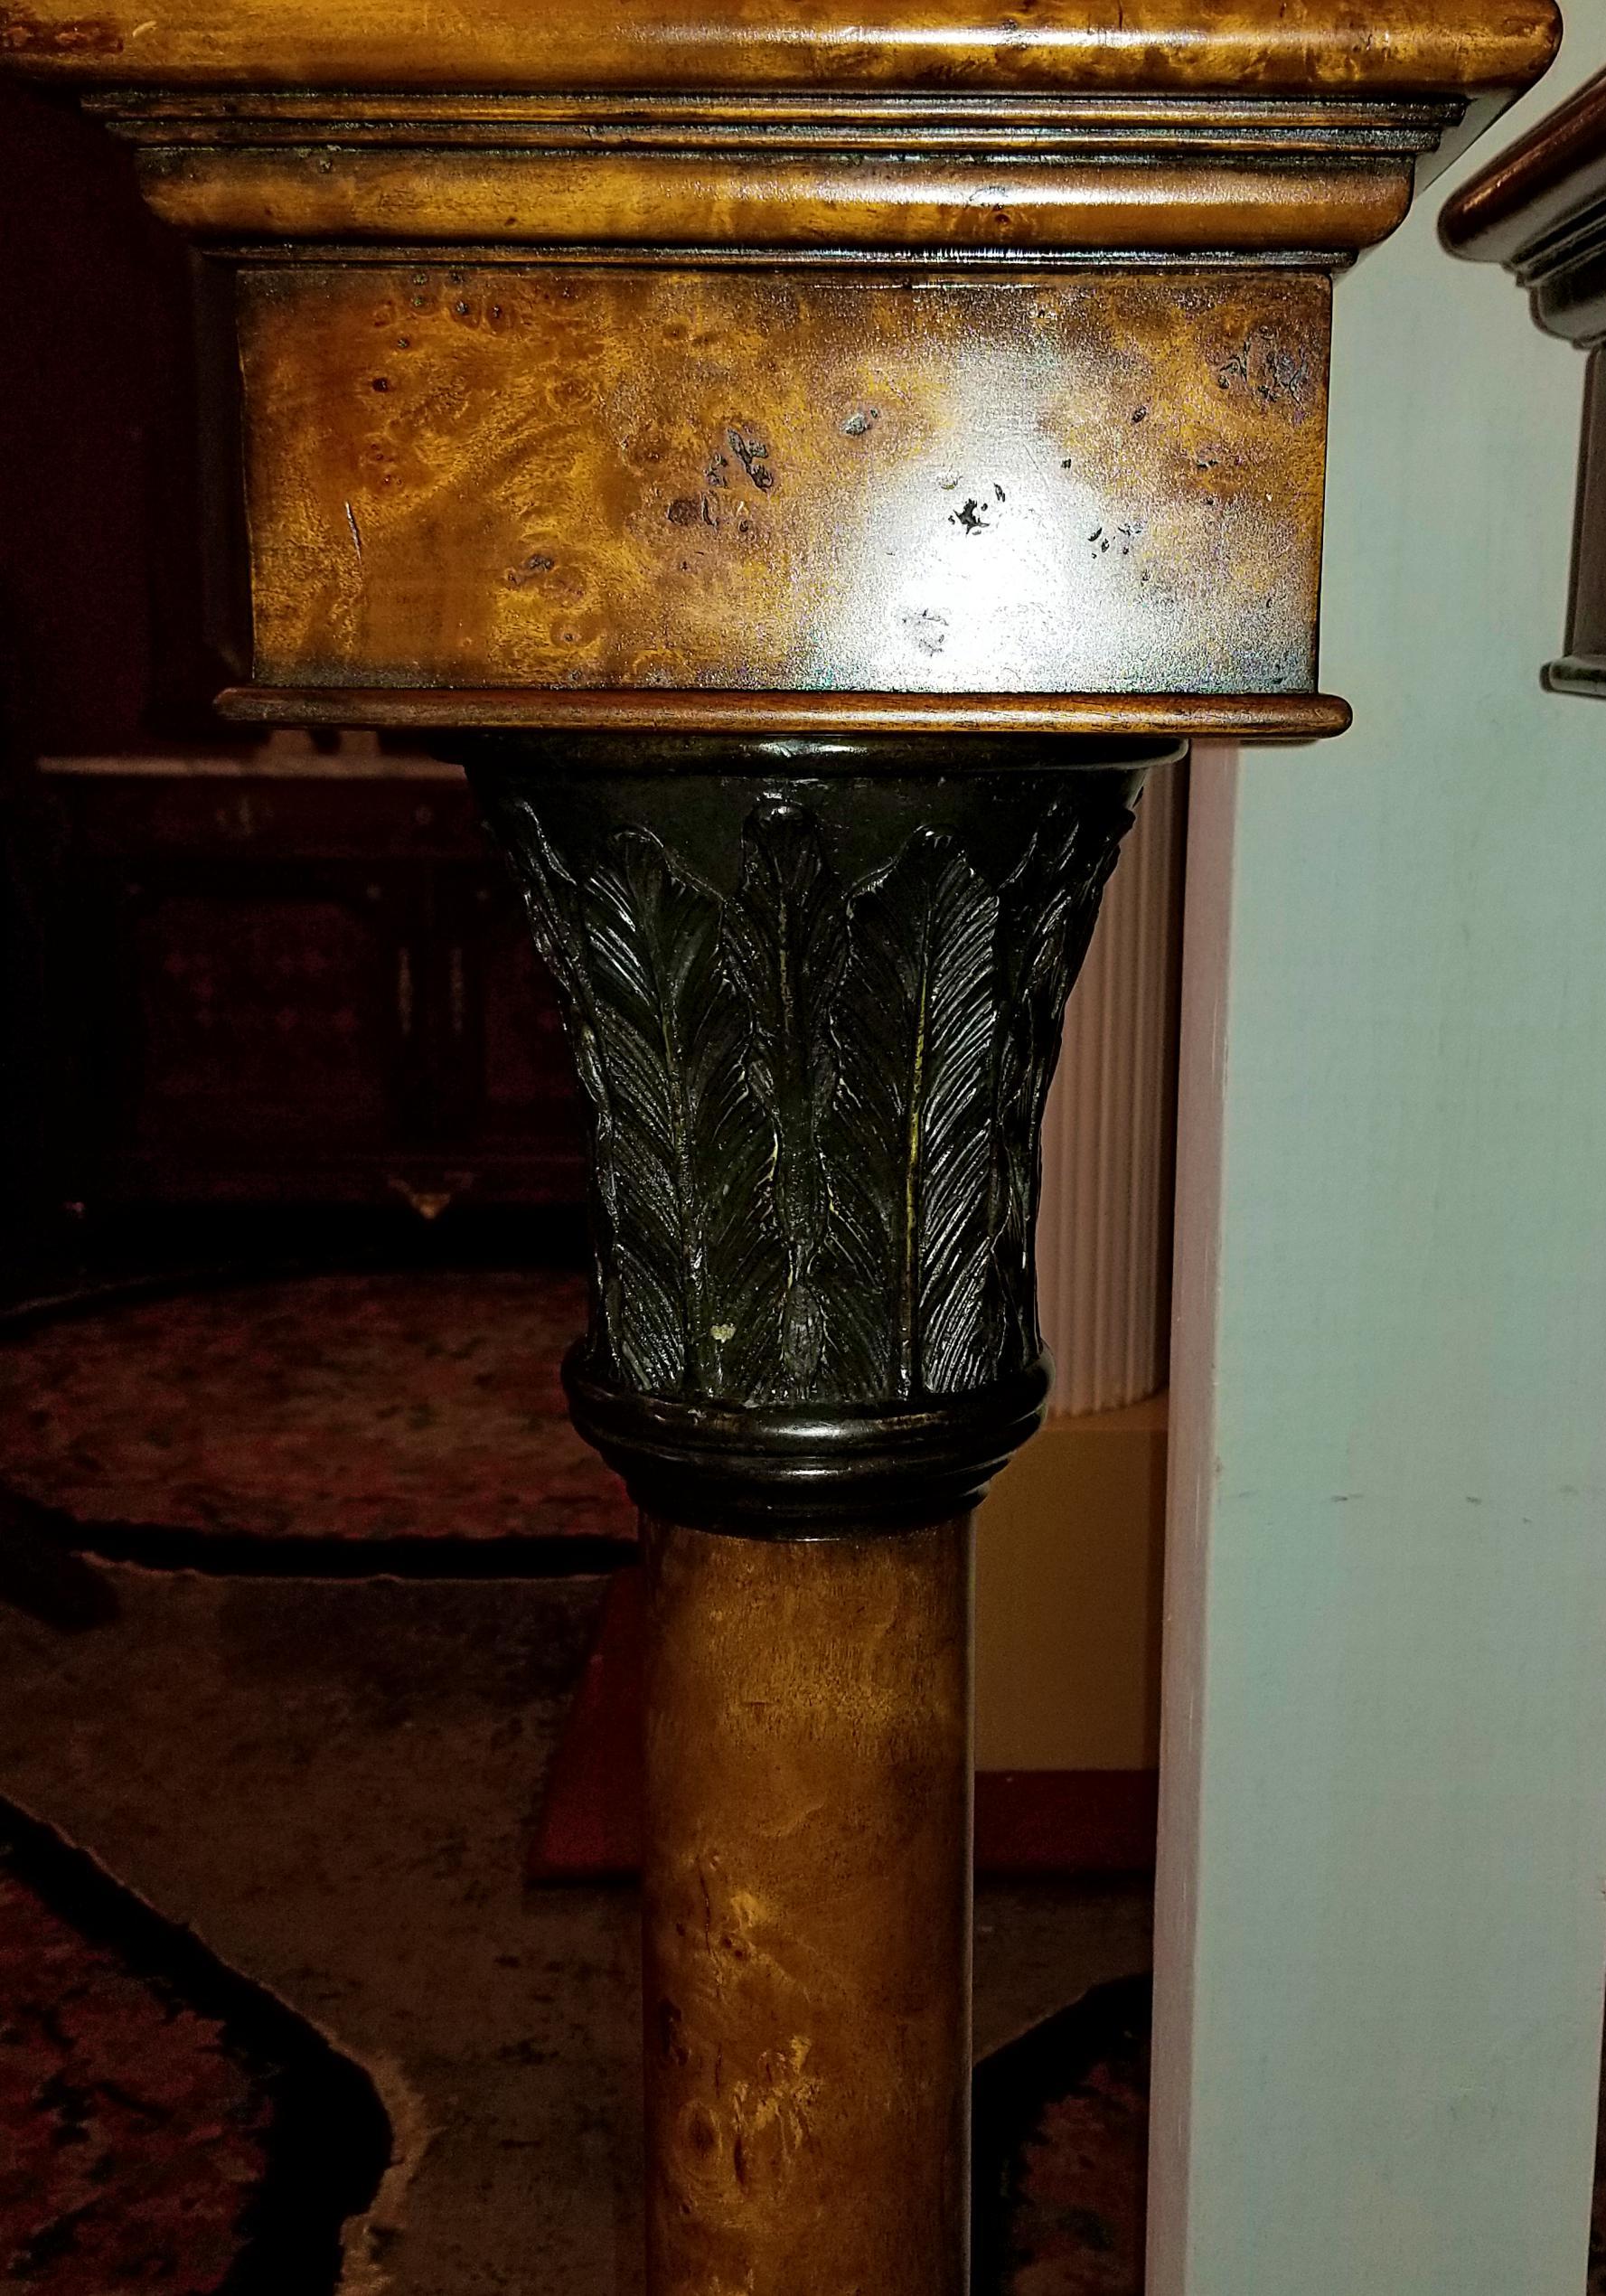 Presenting a gorgeous PPair of Biedermeier Style Burlwood and Bronze Mounted Pedestals.

Probably 20th century and possibly made by the high-end manufacturer, Theodore Alexander of NY and S. Carolina.

Made of stunning burl yewood with a glorious